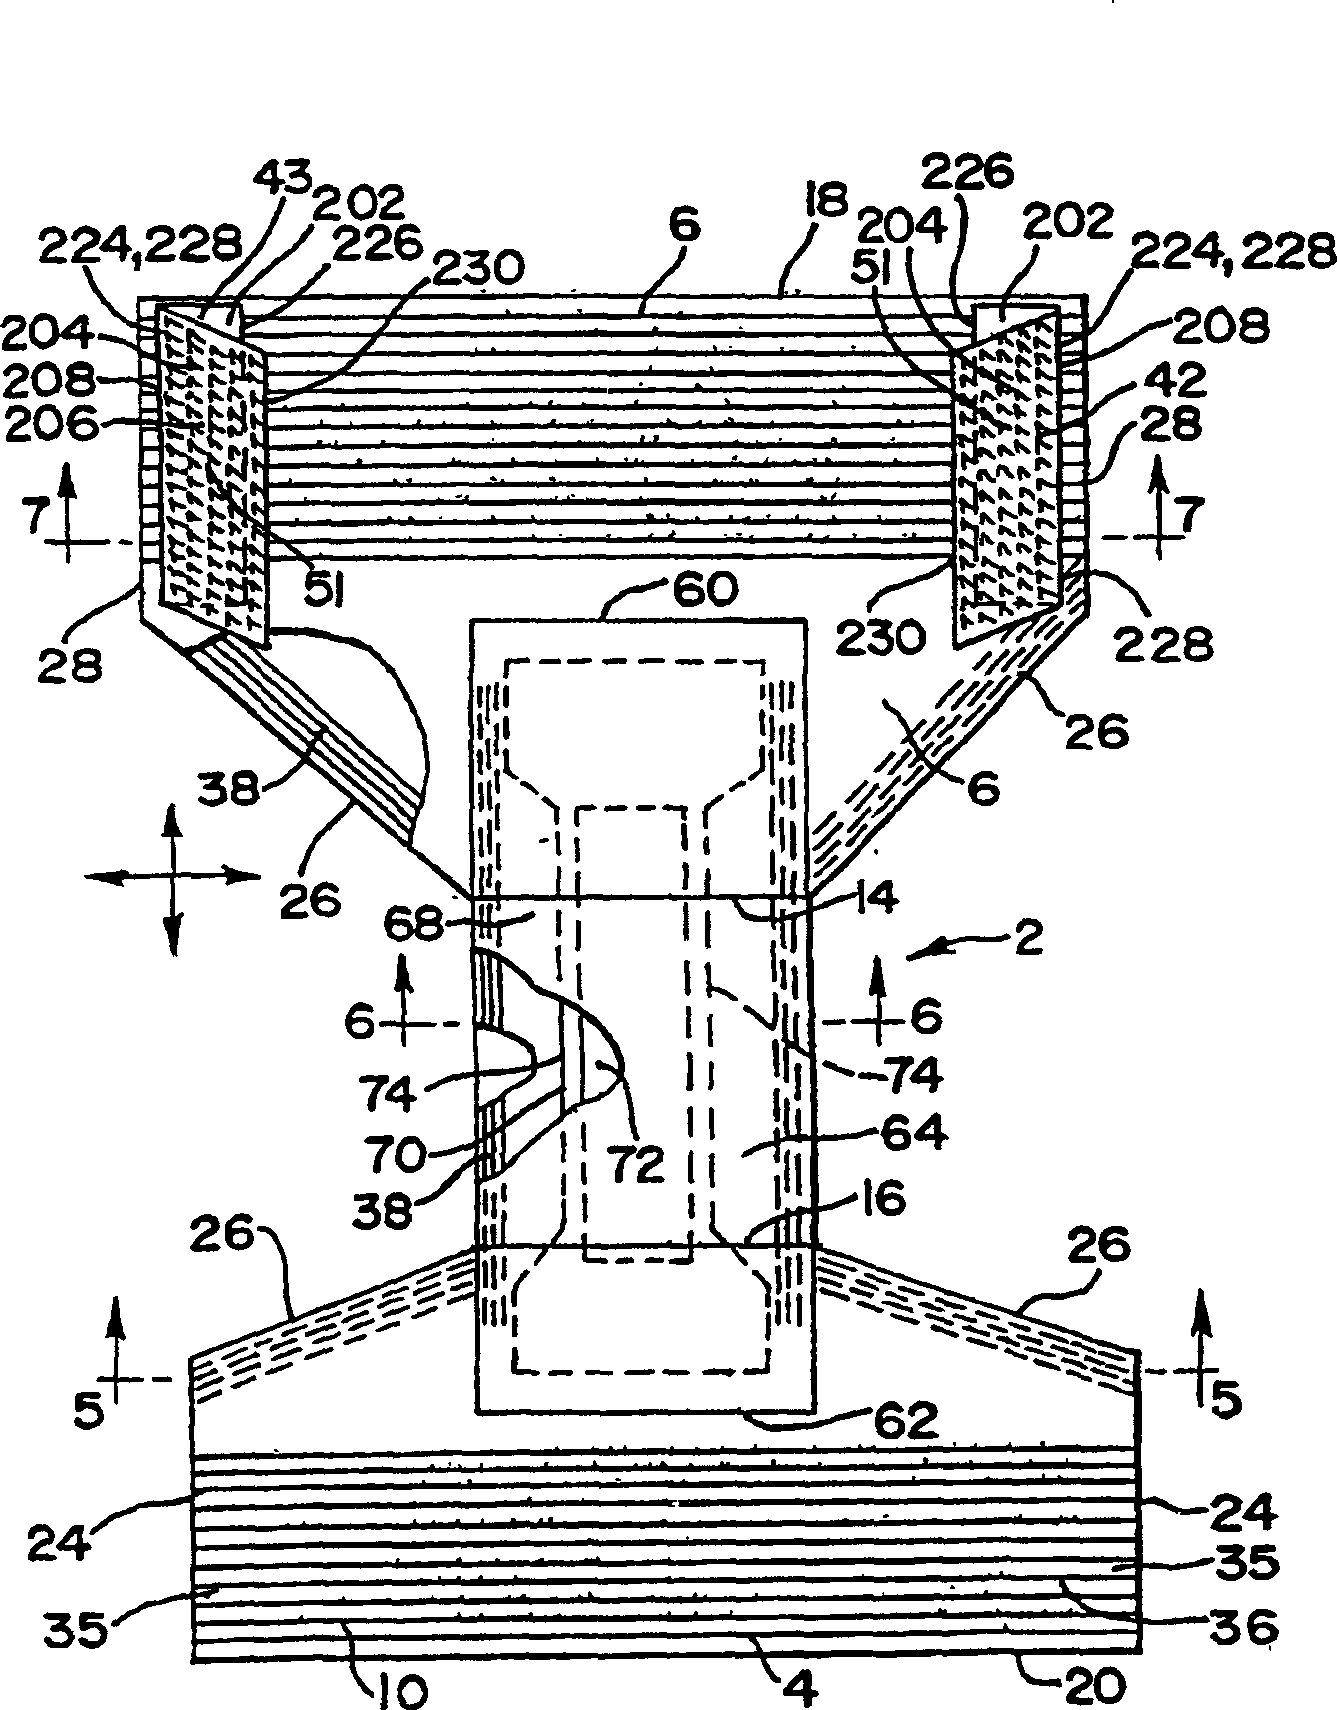 Refastenable absorbent garment and method for assembly thereof